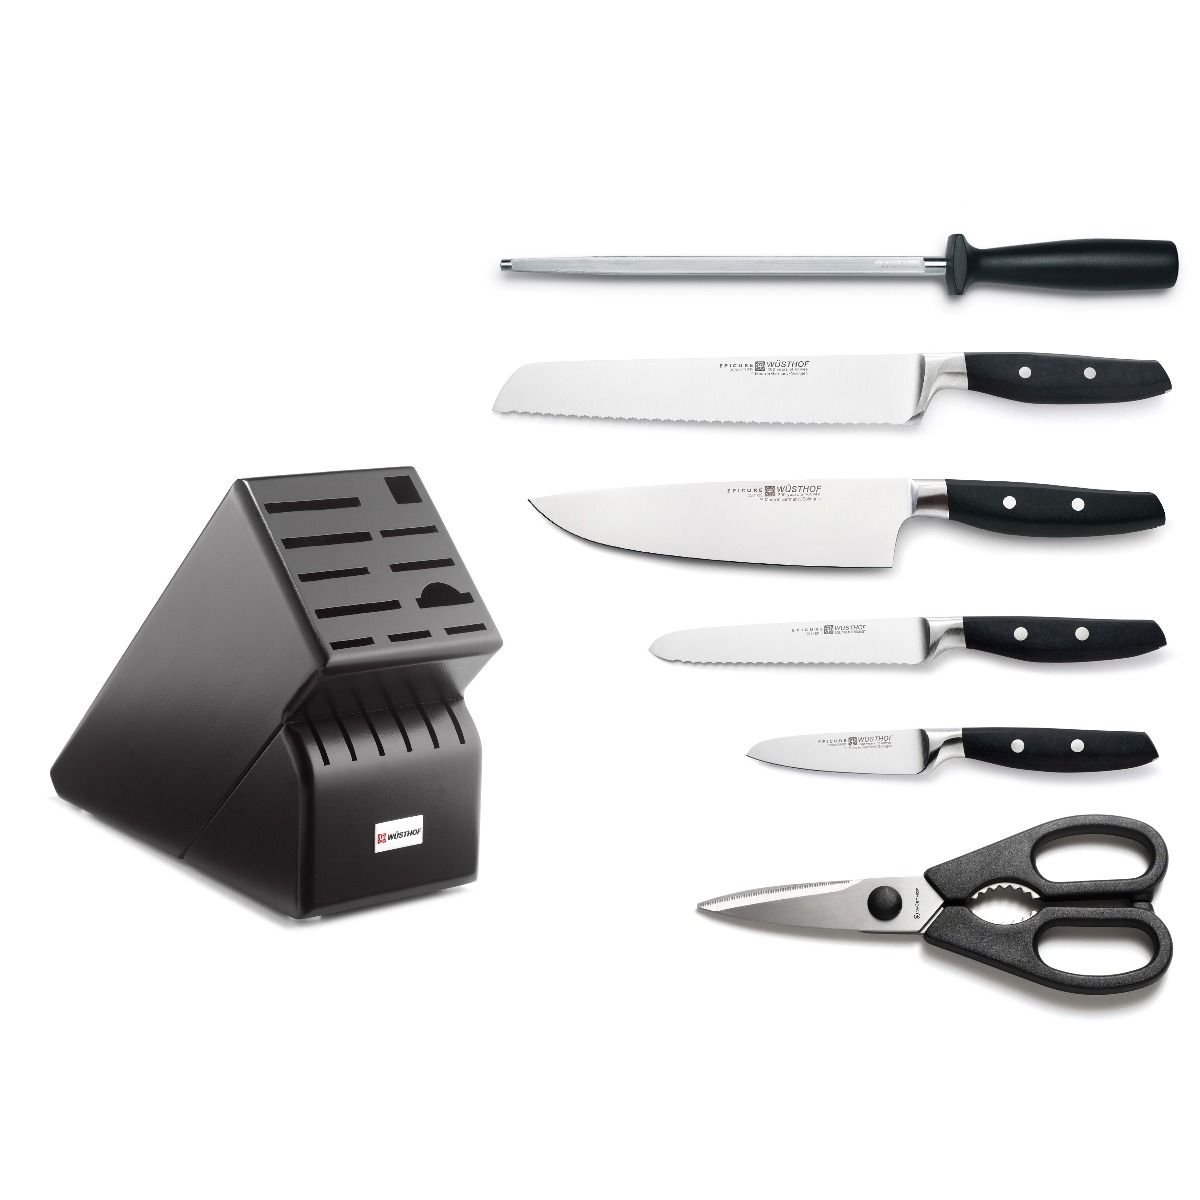 Wusthof Performer Knife Set - 6 Piece with Block